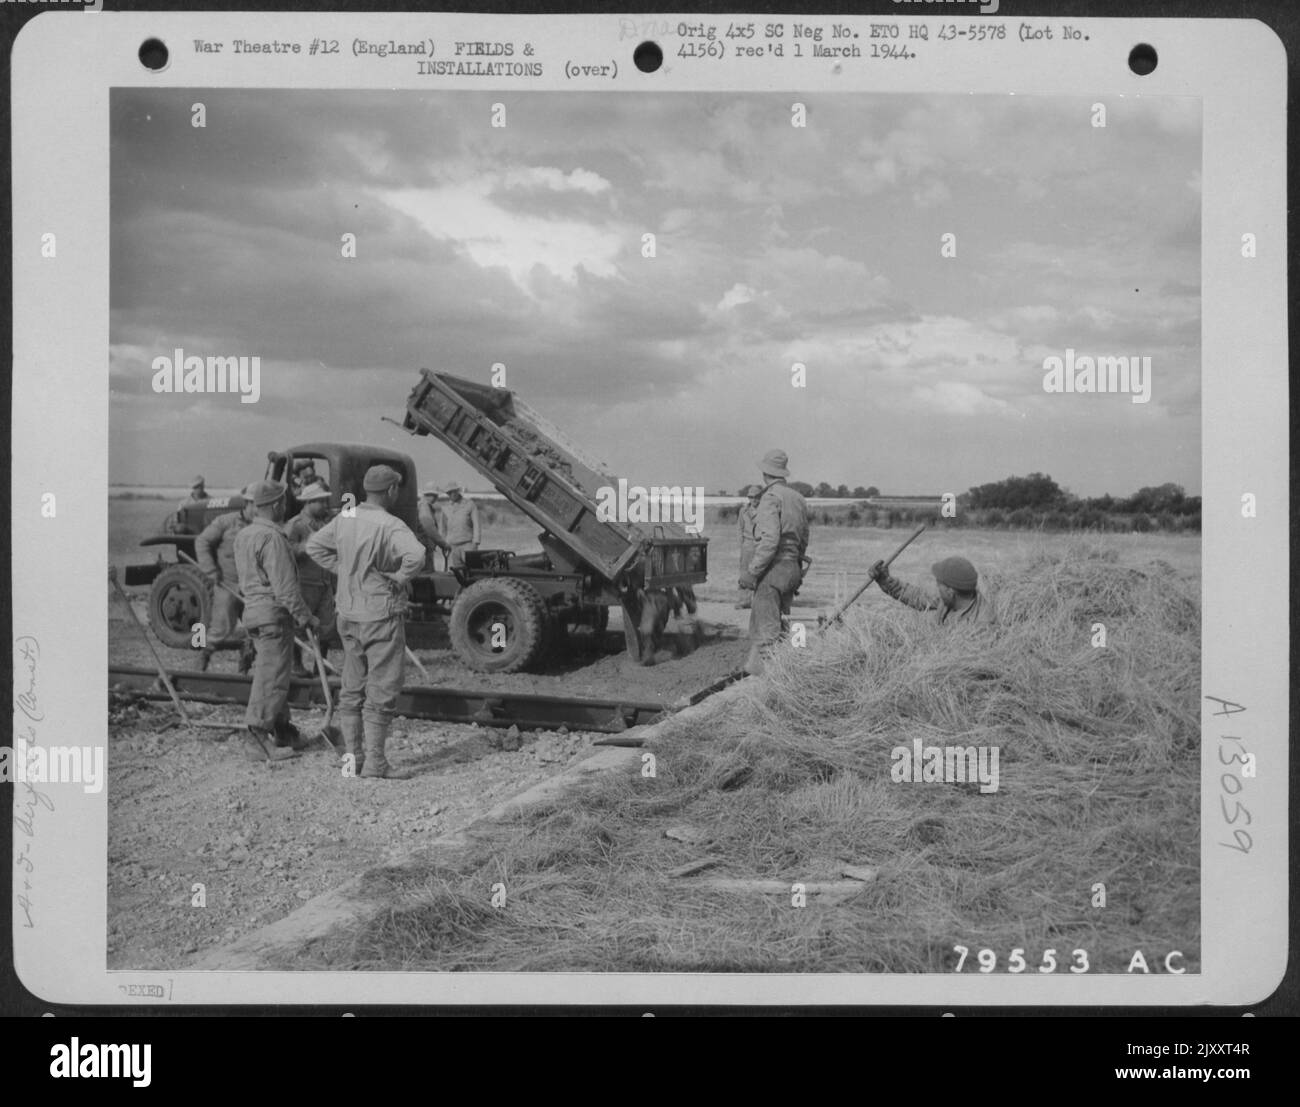 A Crew Of Engineers Pours Concrete For The Runways During The Construction Of An Airfield At Molesworth, England. 7 July 1943. Stock Photo